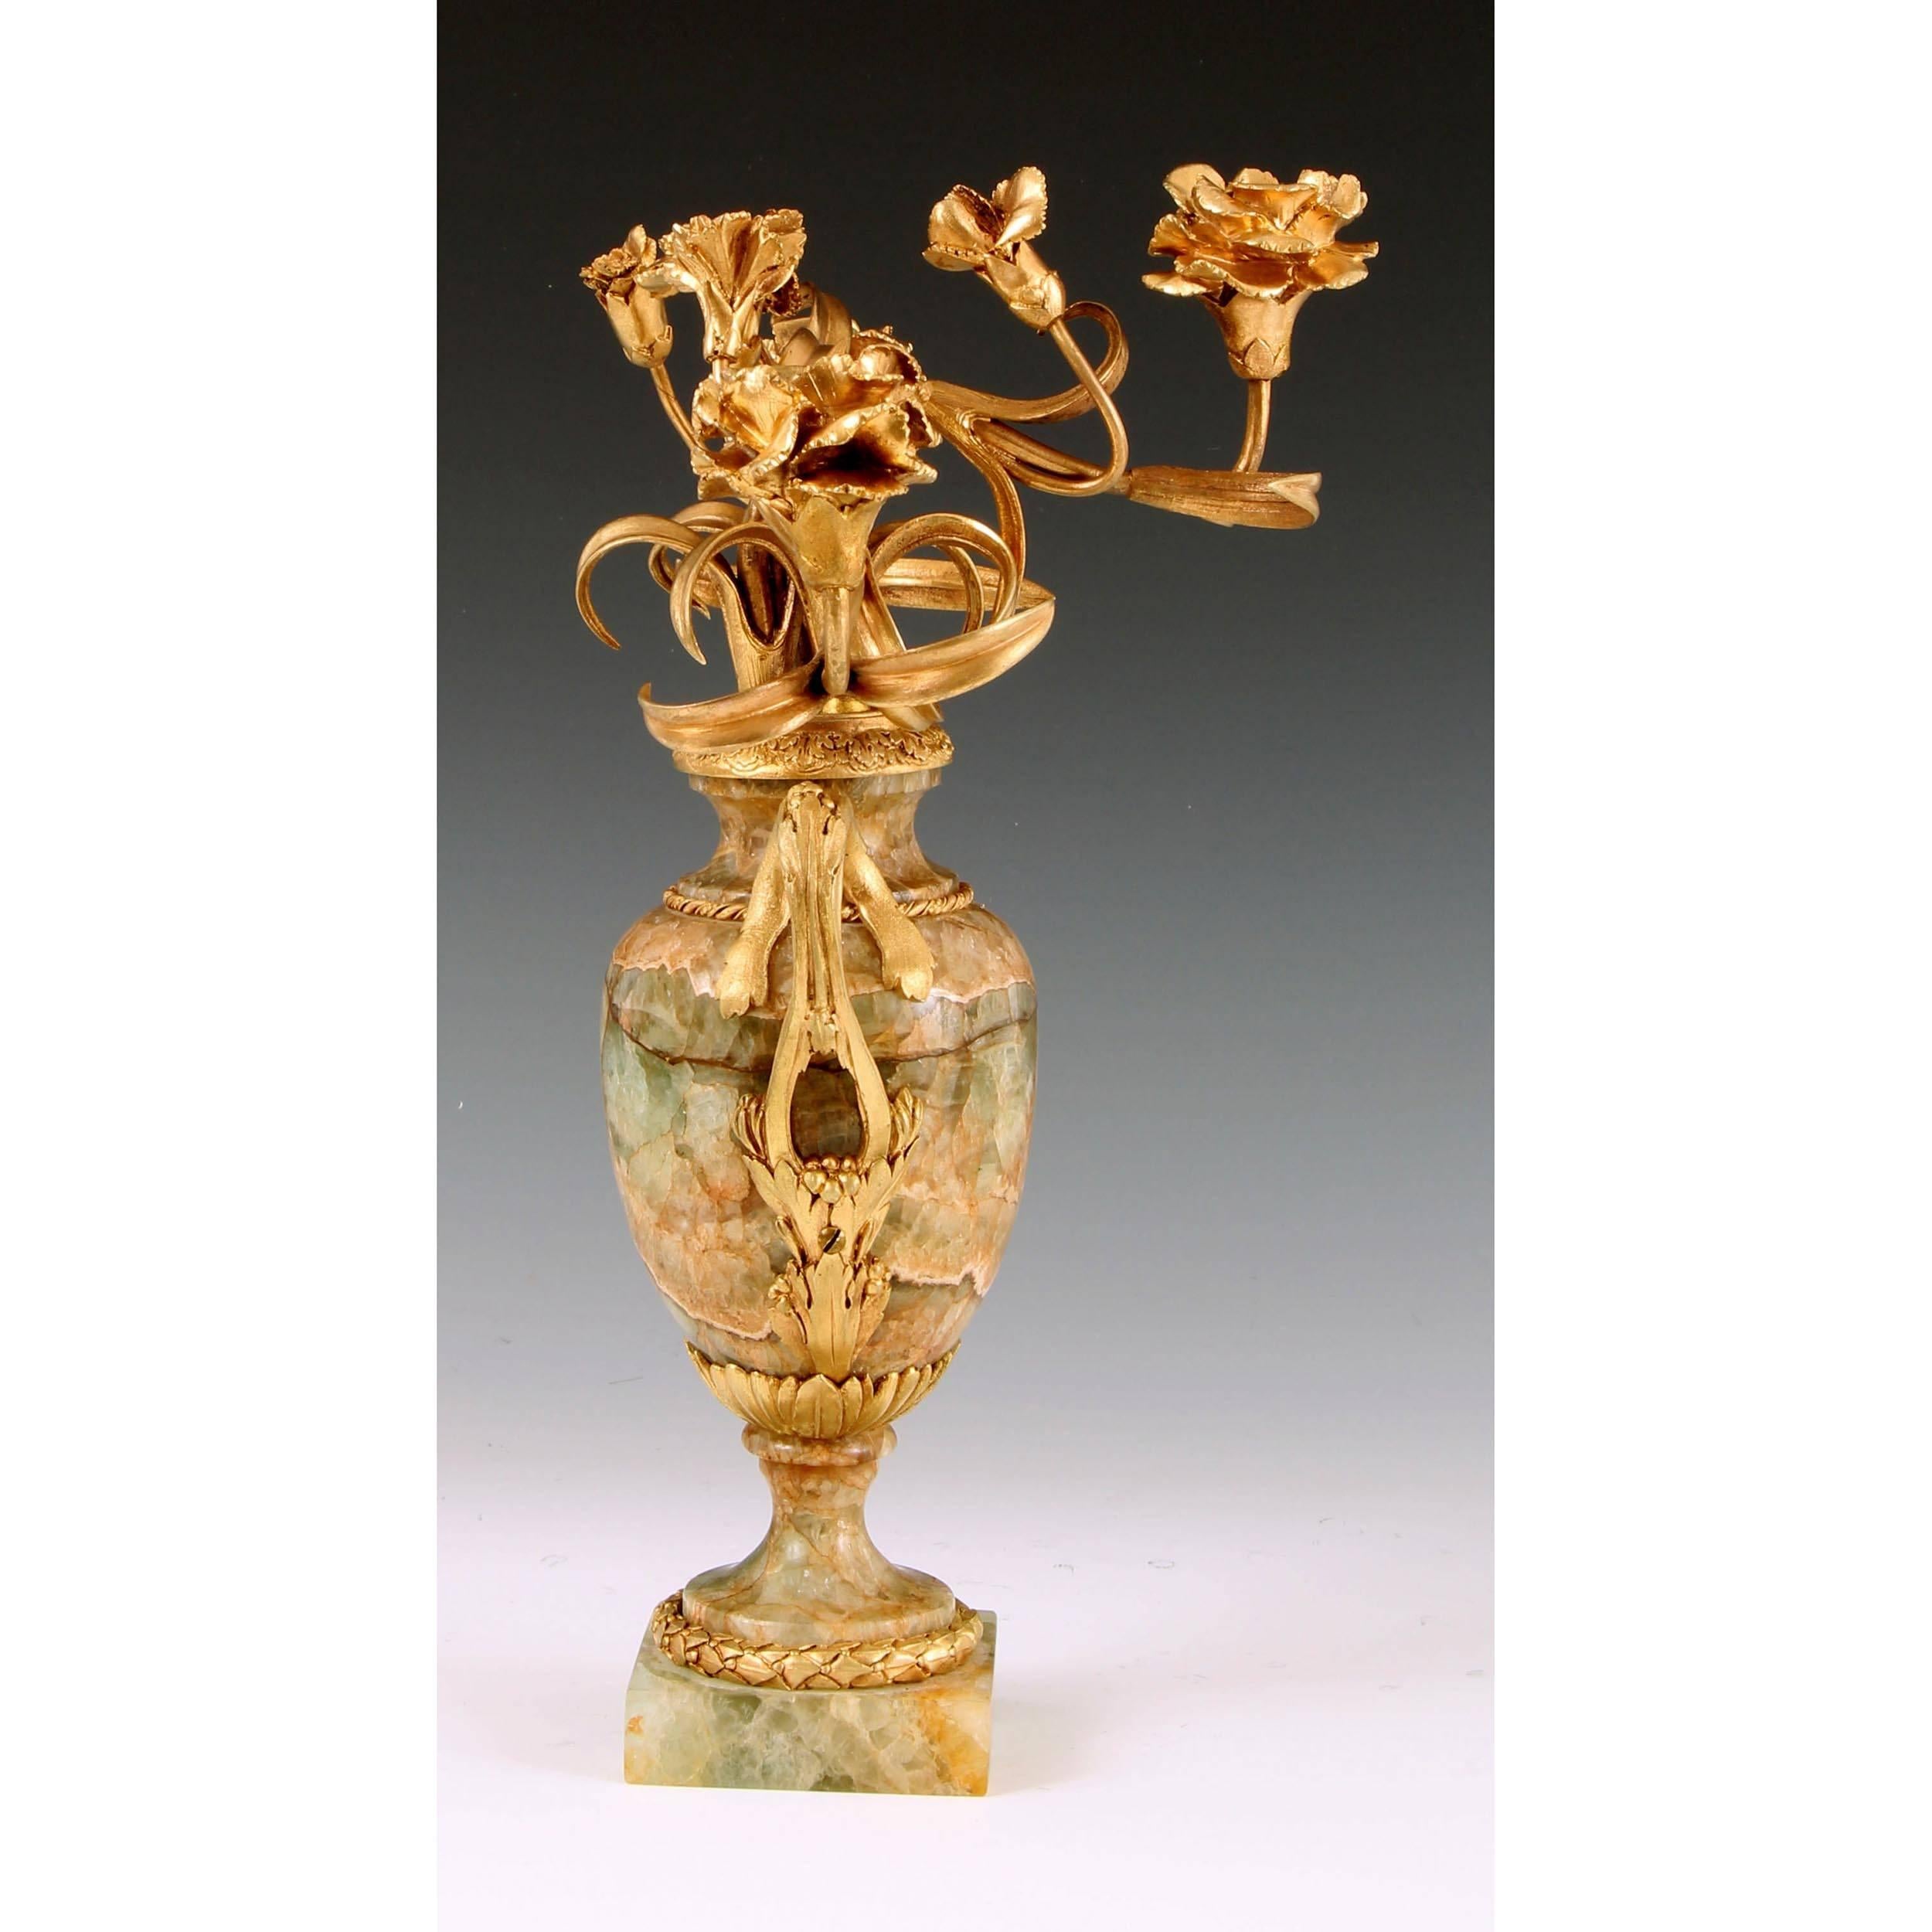 A very fine late 18th century neoclassical Louis XVI Weardale Fluorspar and ormolu candelabra, the vase of classical baluster form, raised on a stepped base and supporting naturalistic branches of foliage and flowers. 

Weardale Fluorspar is the